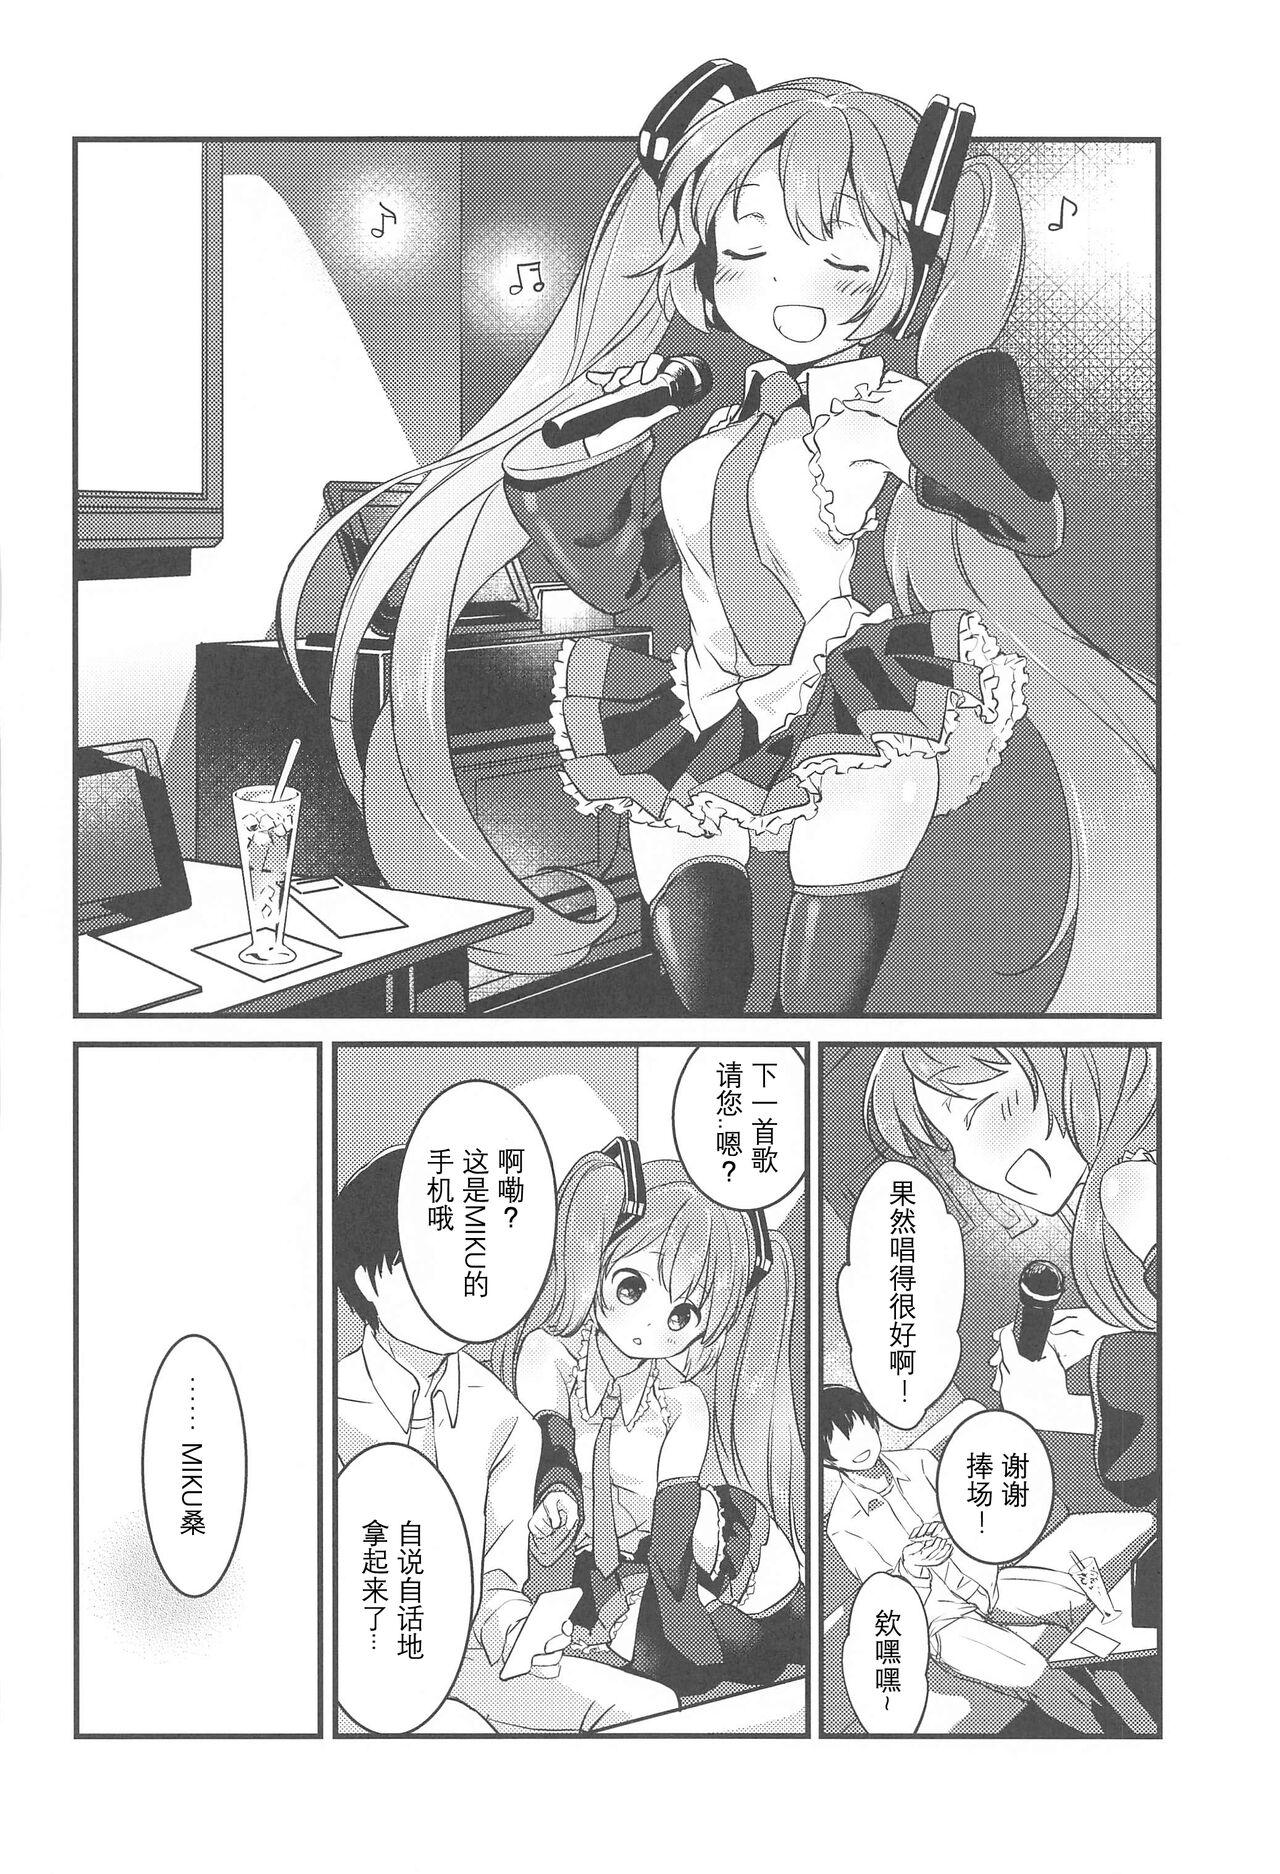 Oldman room309 - Vocaloid Old Young - Page 4